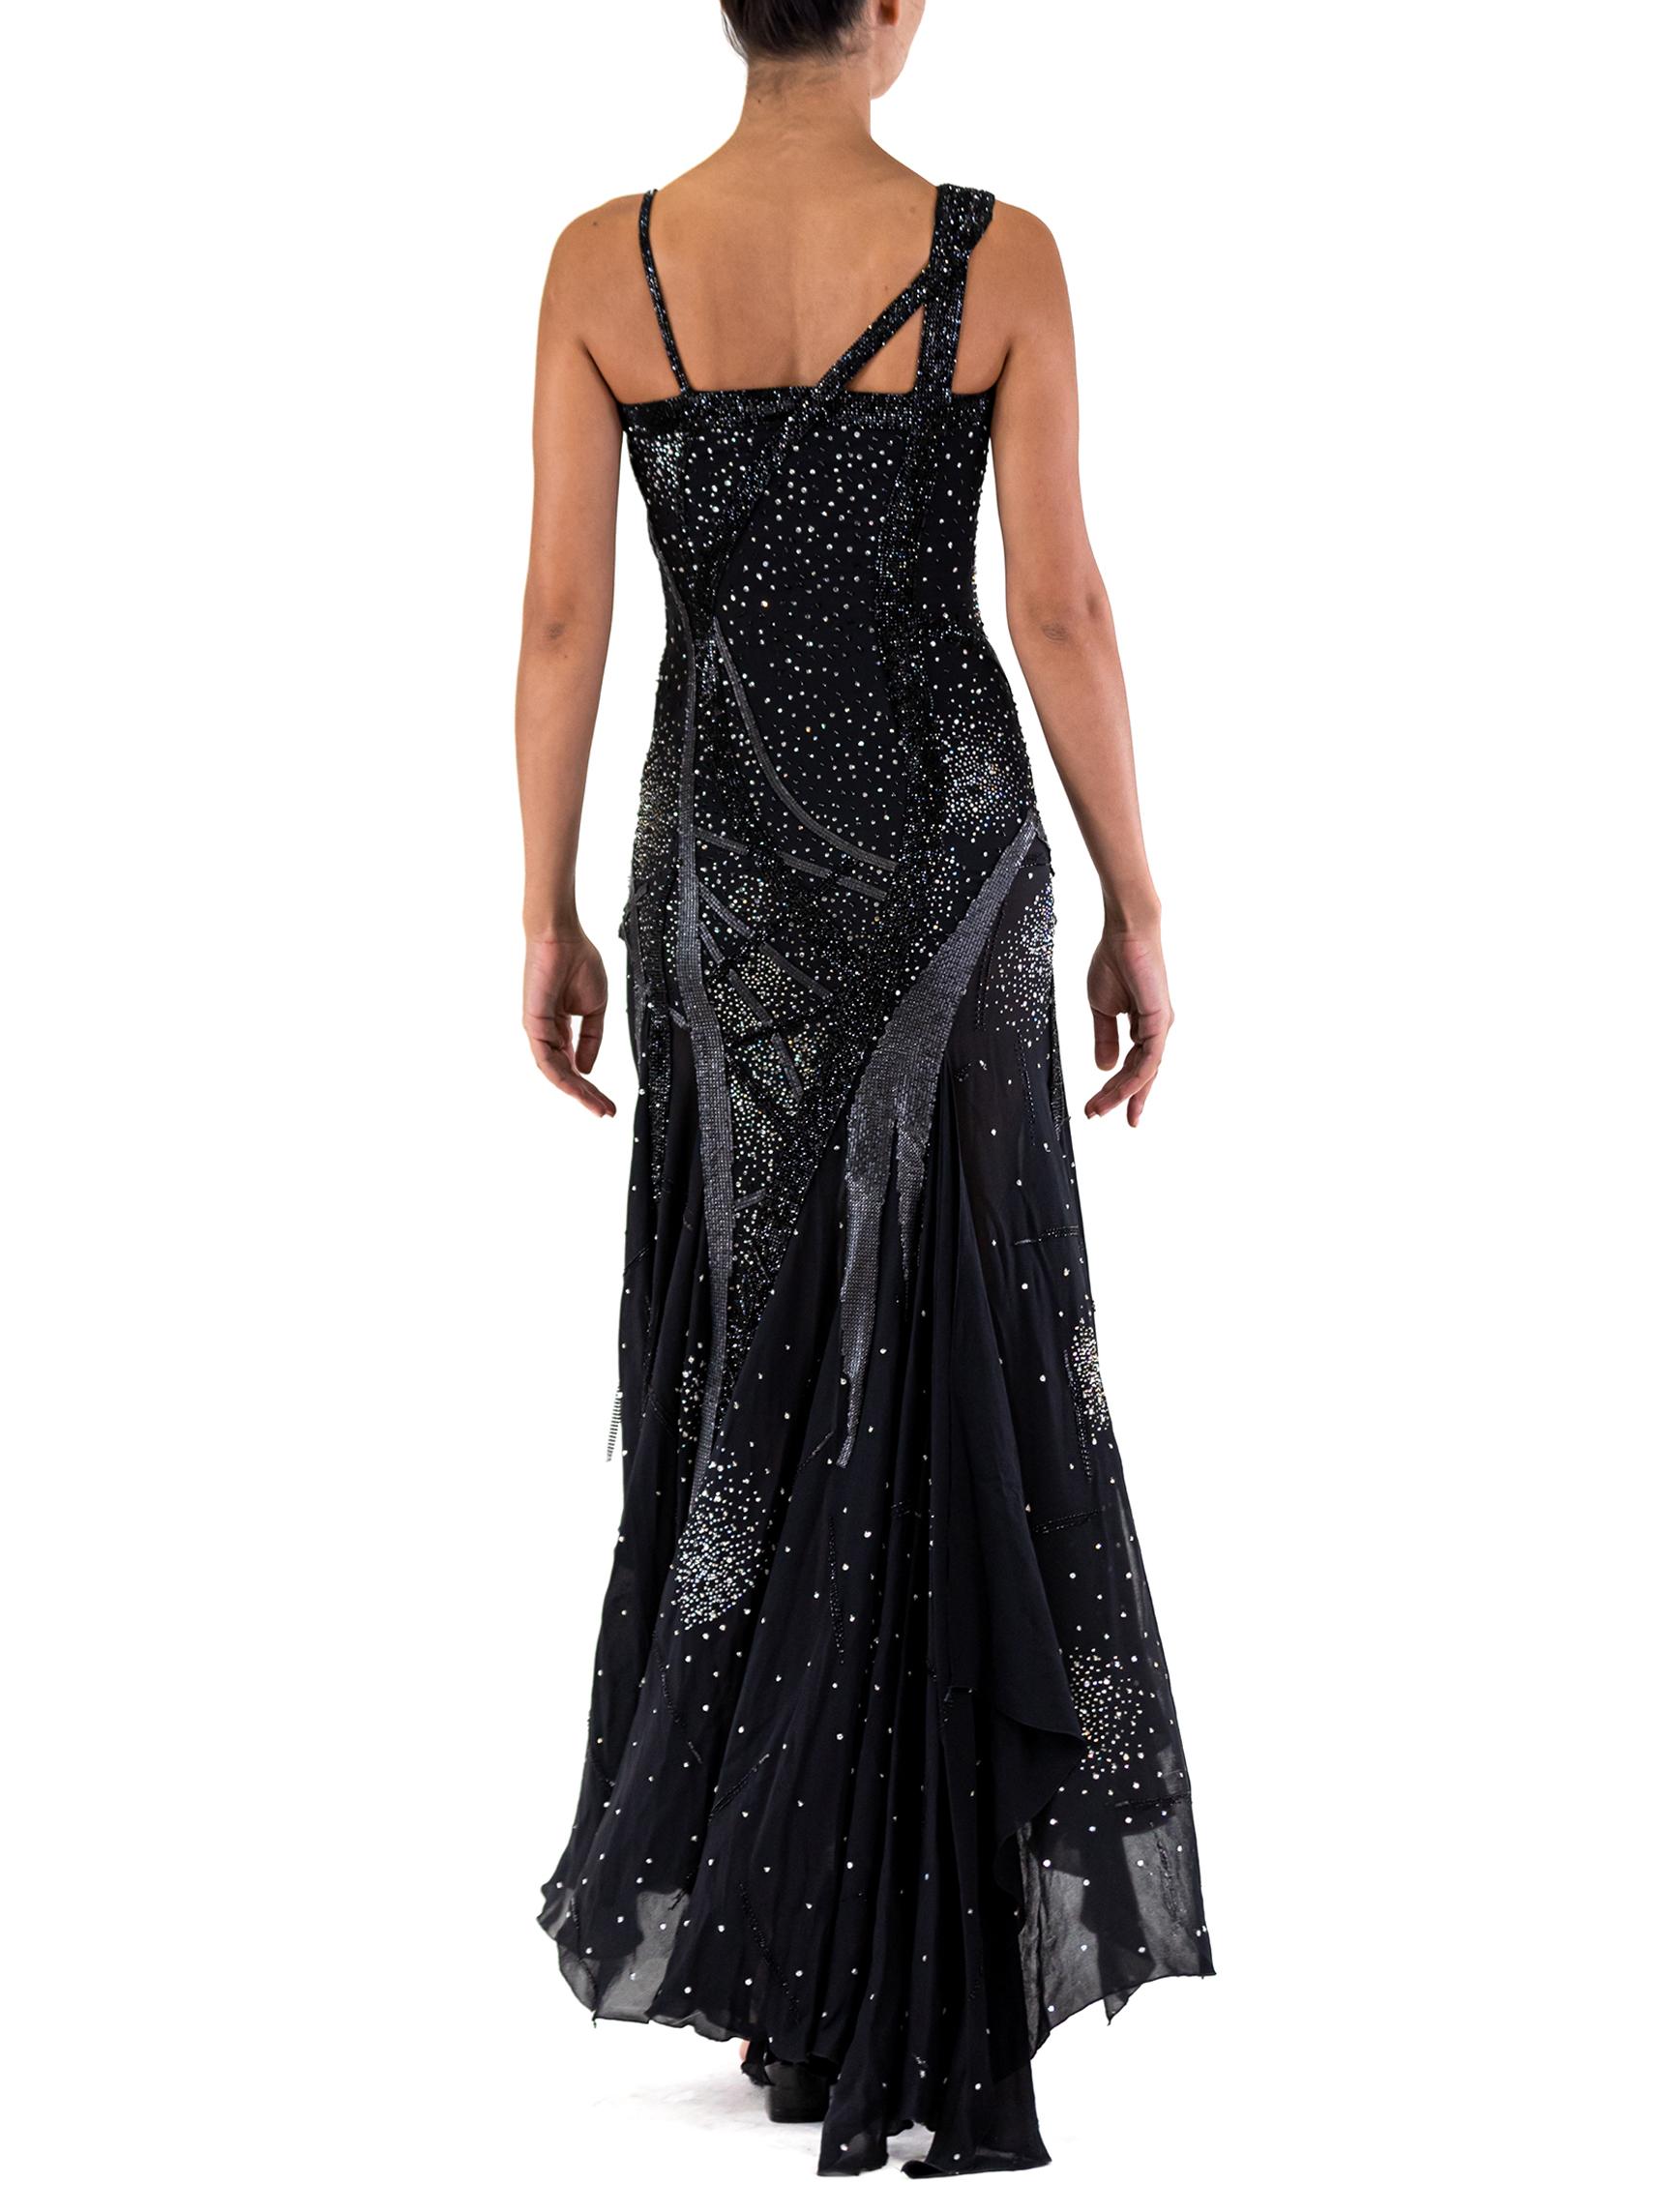 2000S ATELIER VERSACE GIANNI Black Silk Chiffon Haute Couture Crystal Beaded  G For Sale 3